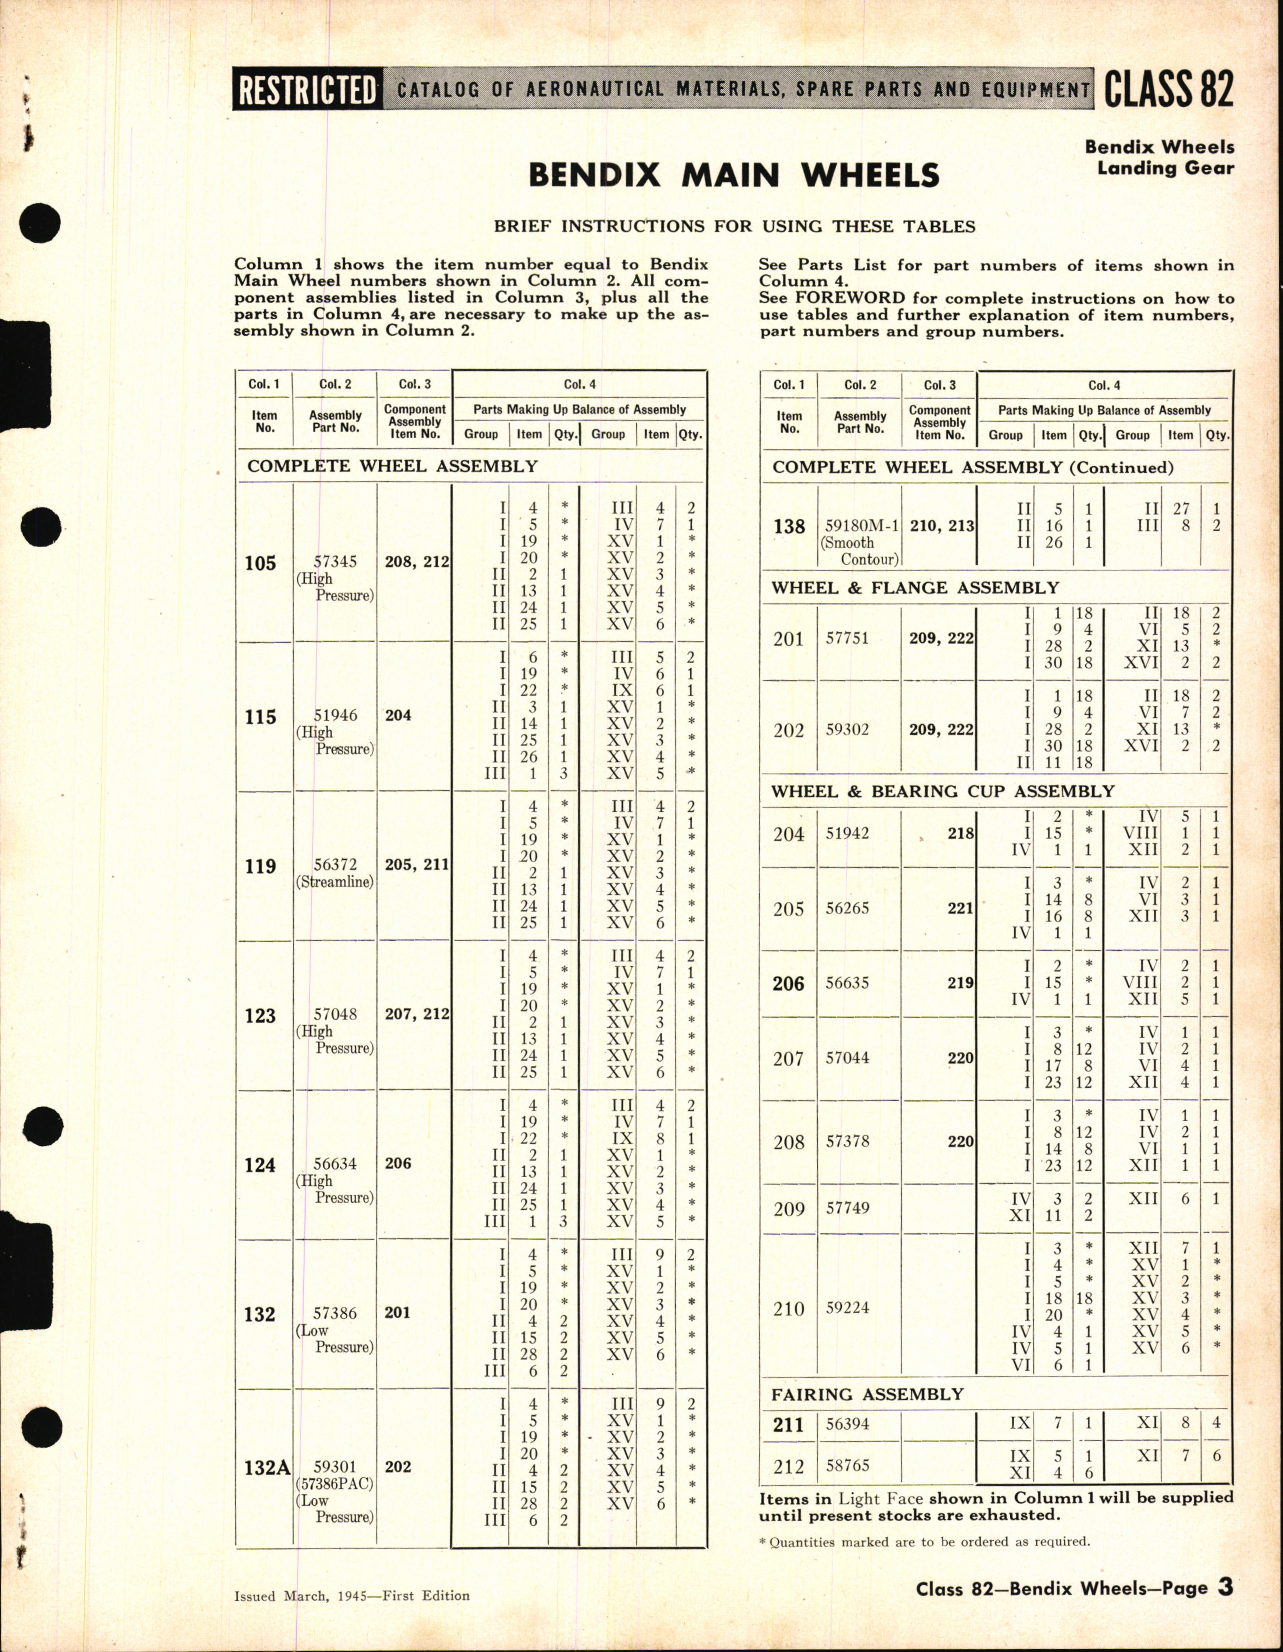 Sample page 3 from AirCorps Library document: Bendix Main Wheels